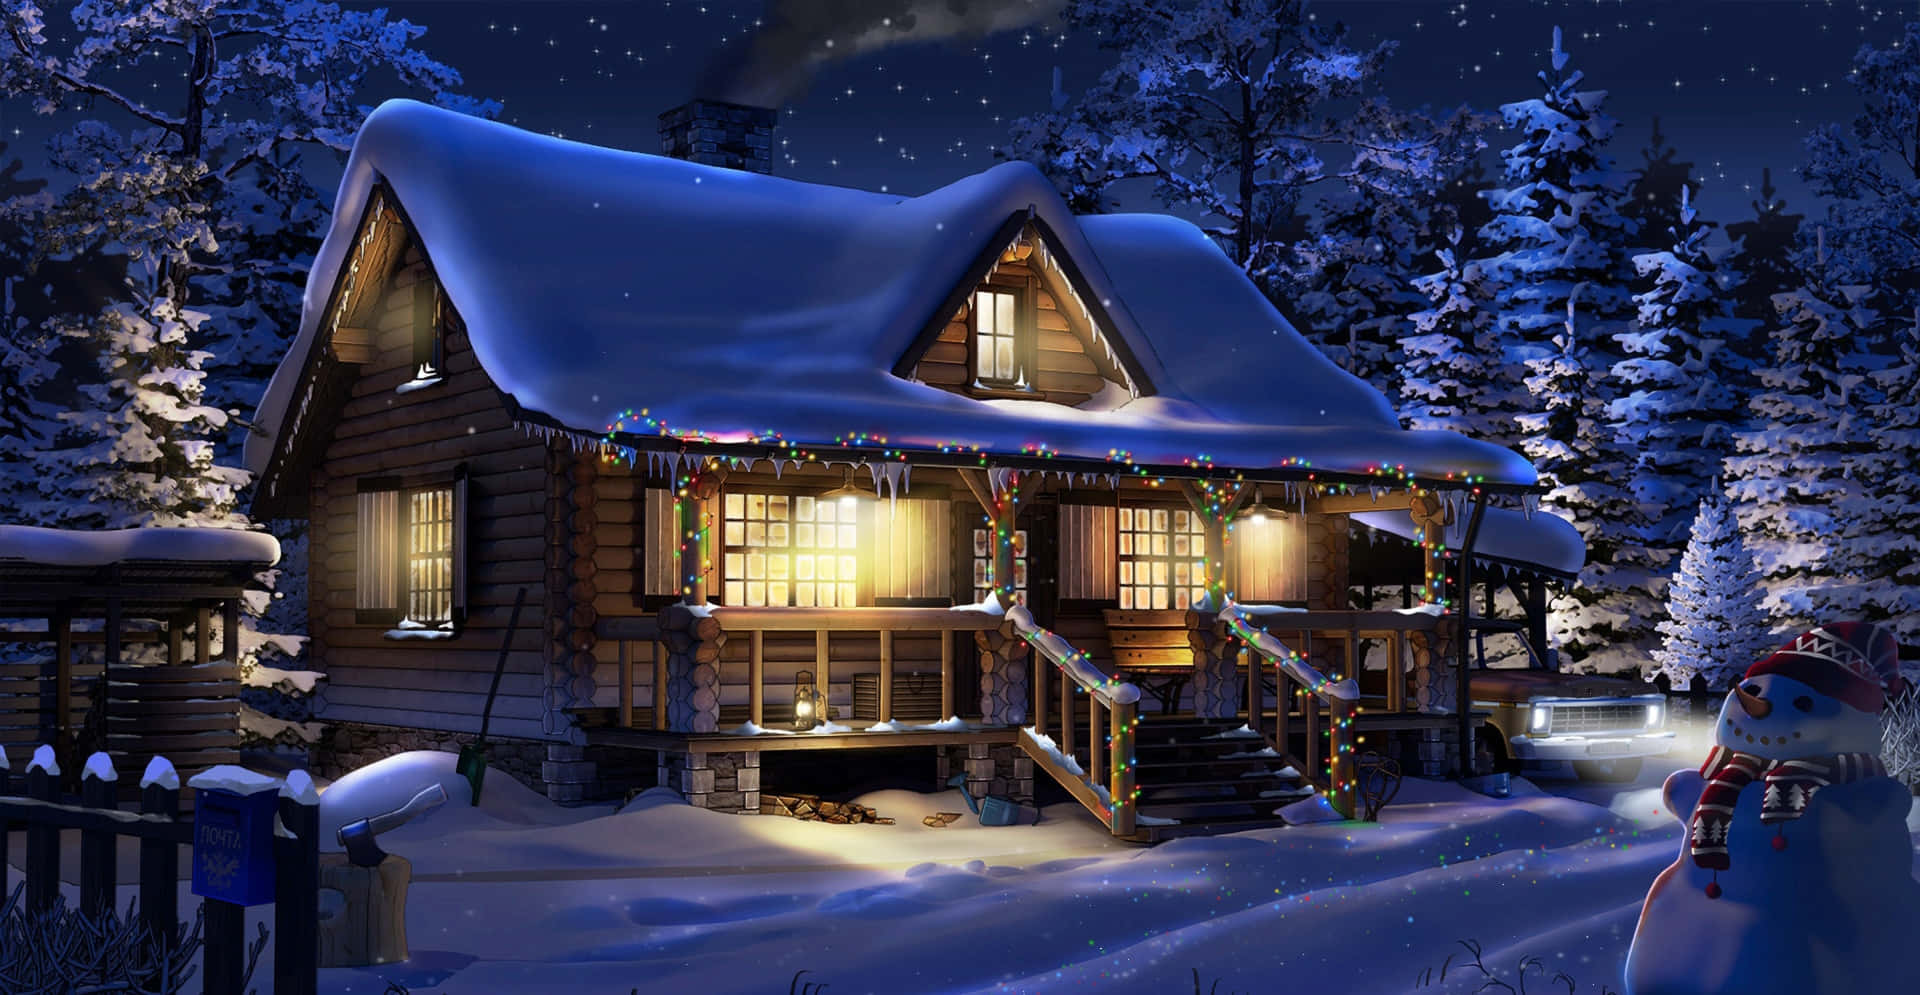 A warm and inviting cozy winter cabin nestled in snow-covered woods. Wallpaper